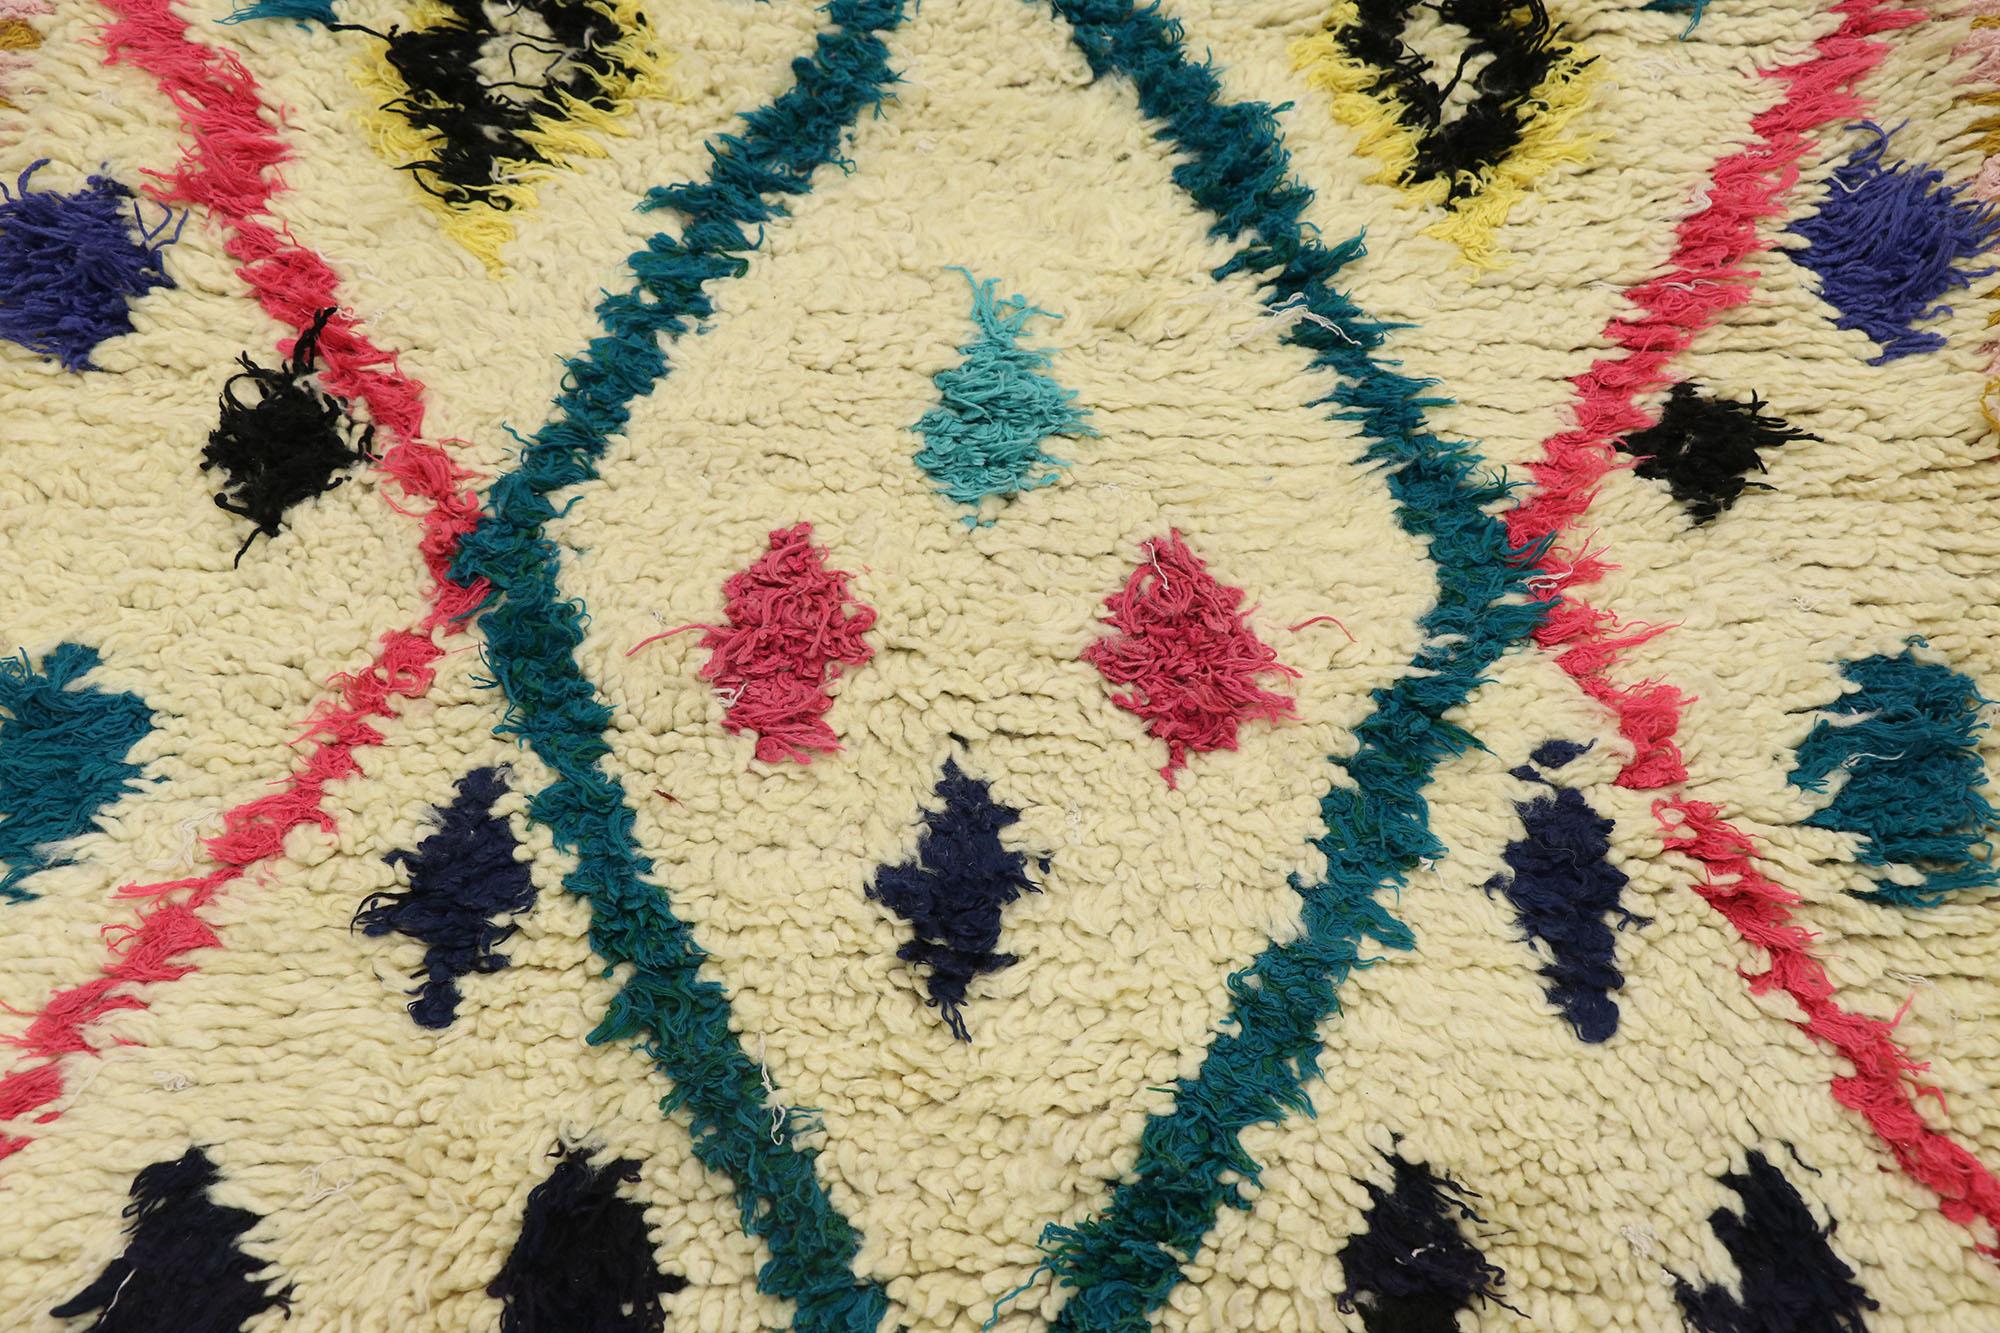 Tribal Vintage Berber Moroccan Azilal Rug with Hygge Boho Chic Style For Sale